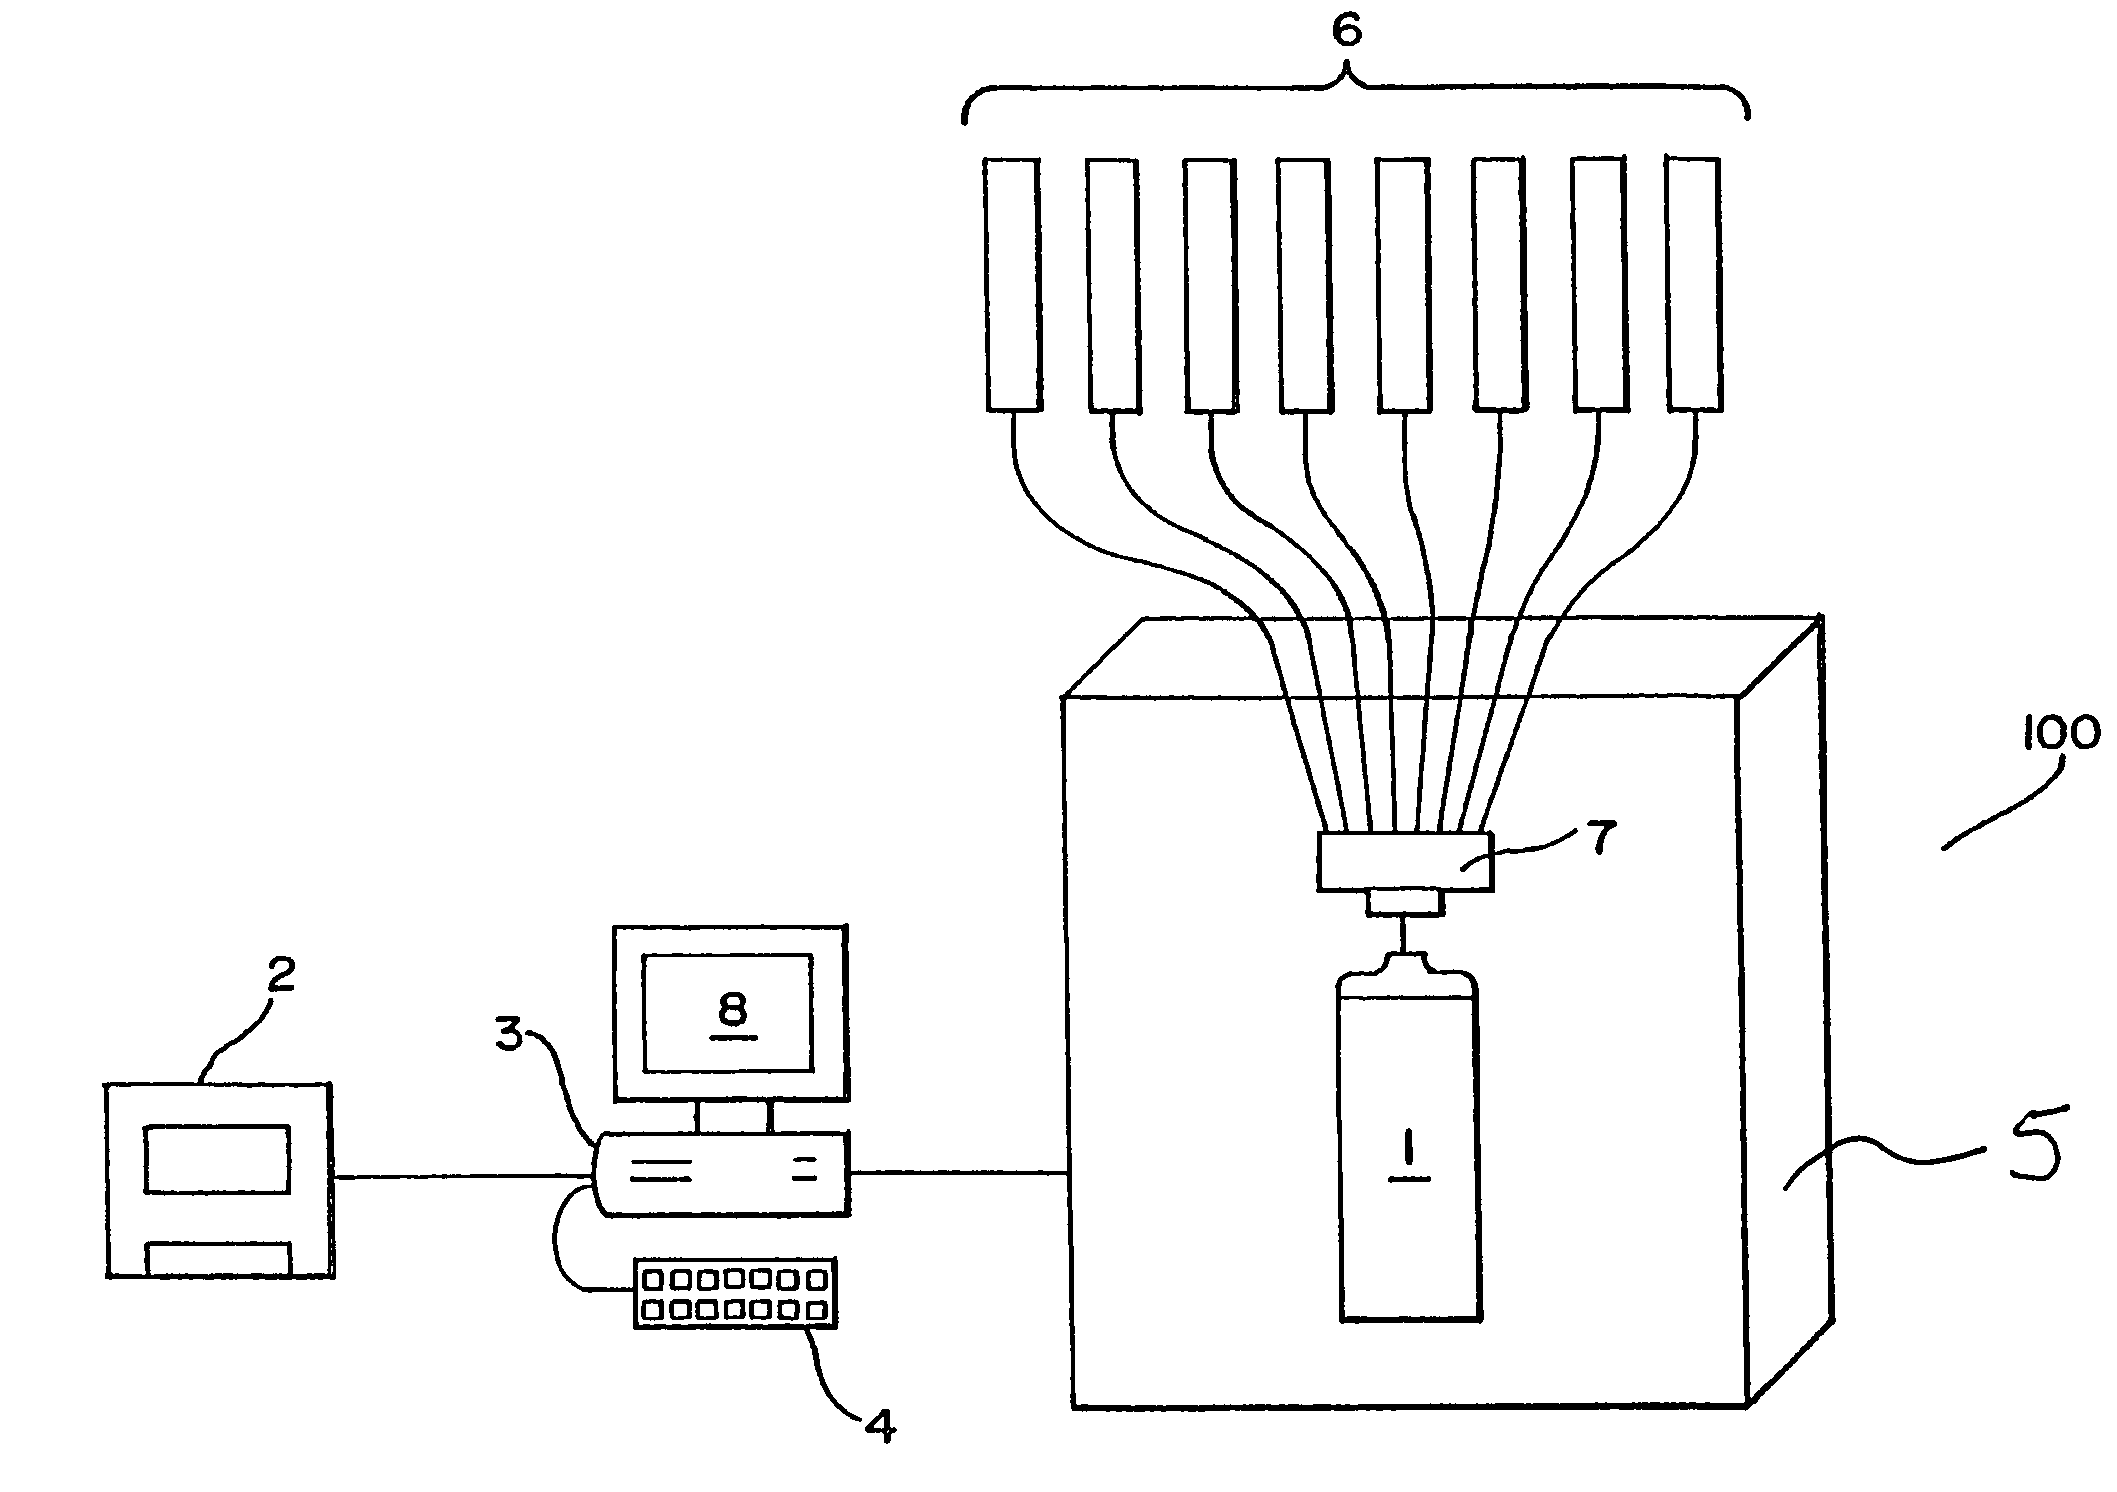 Method of preparing a pressurized container of pigmented paint